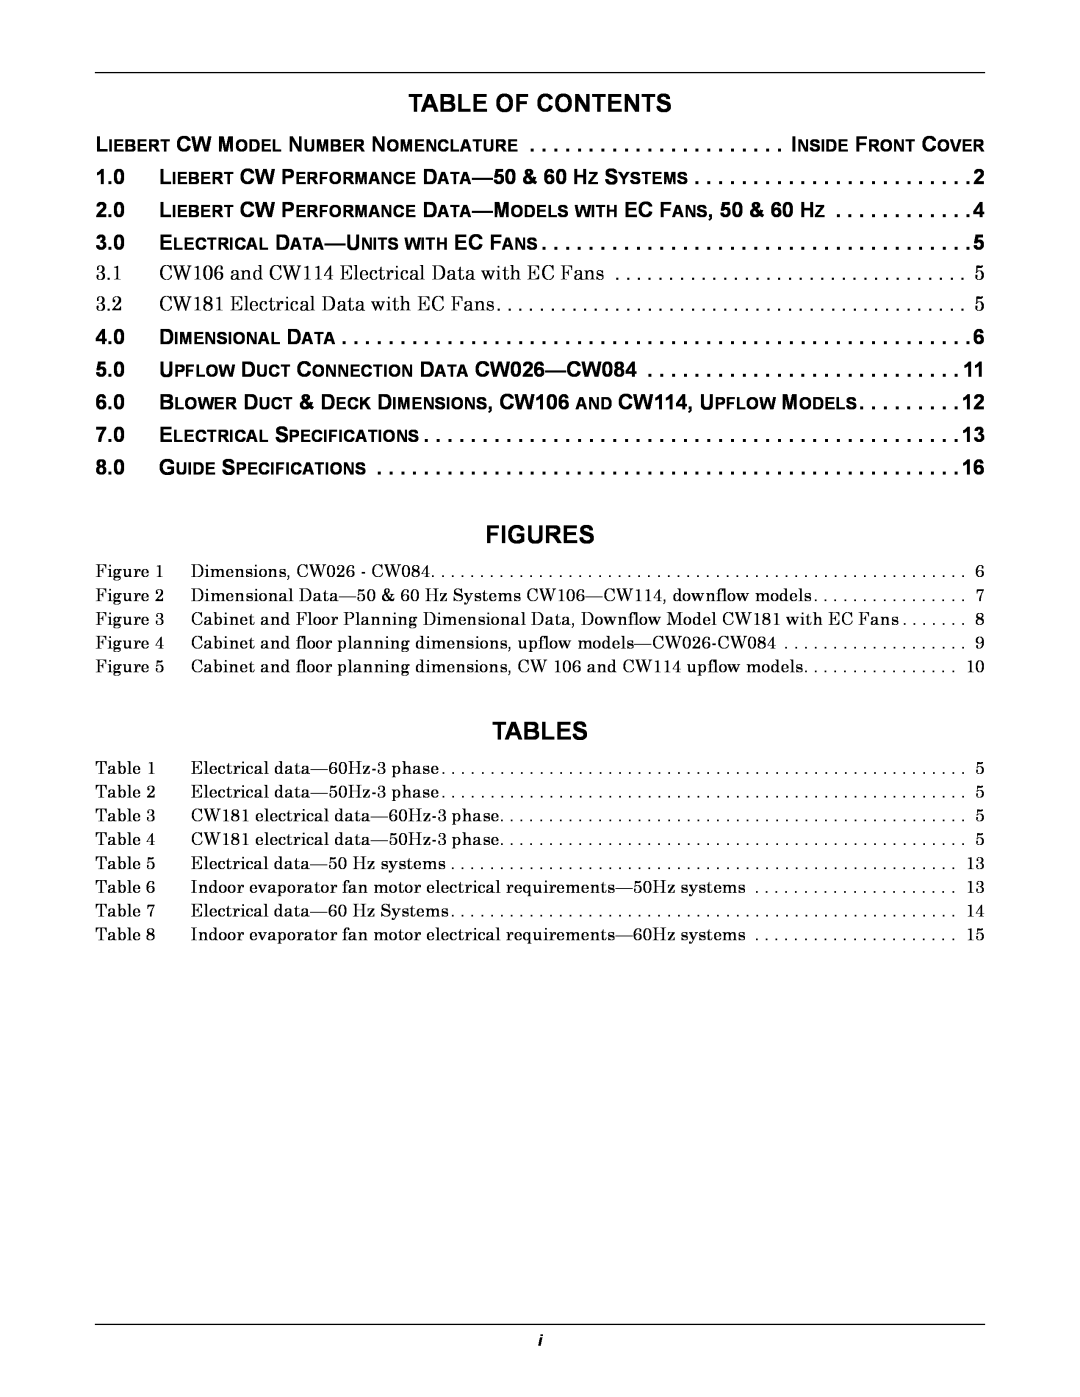 Emerson CW manual Table Of Contents, Figures, Tables 